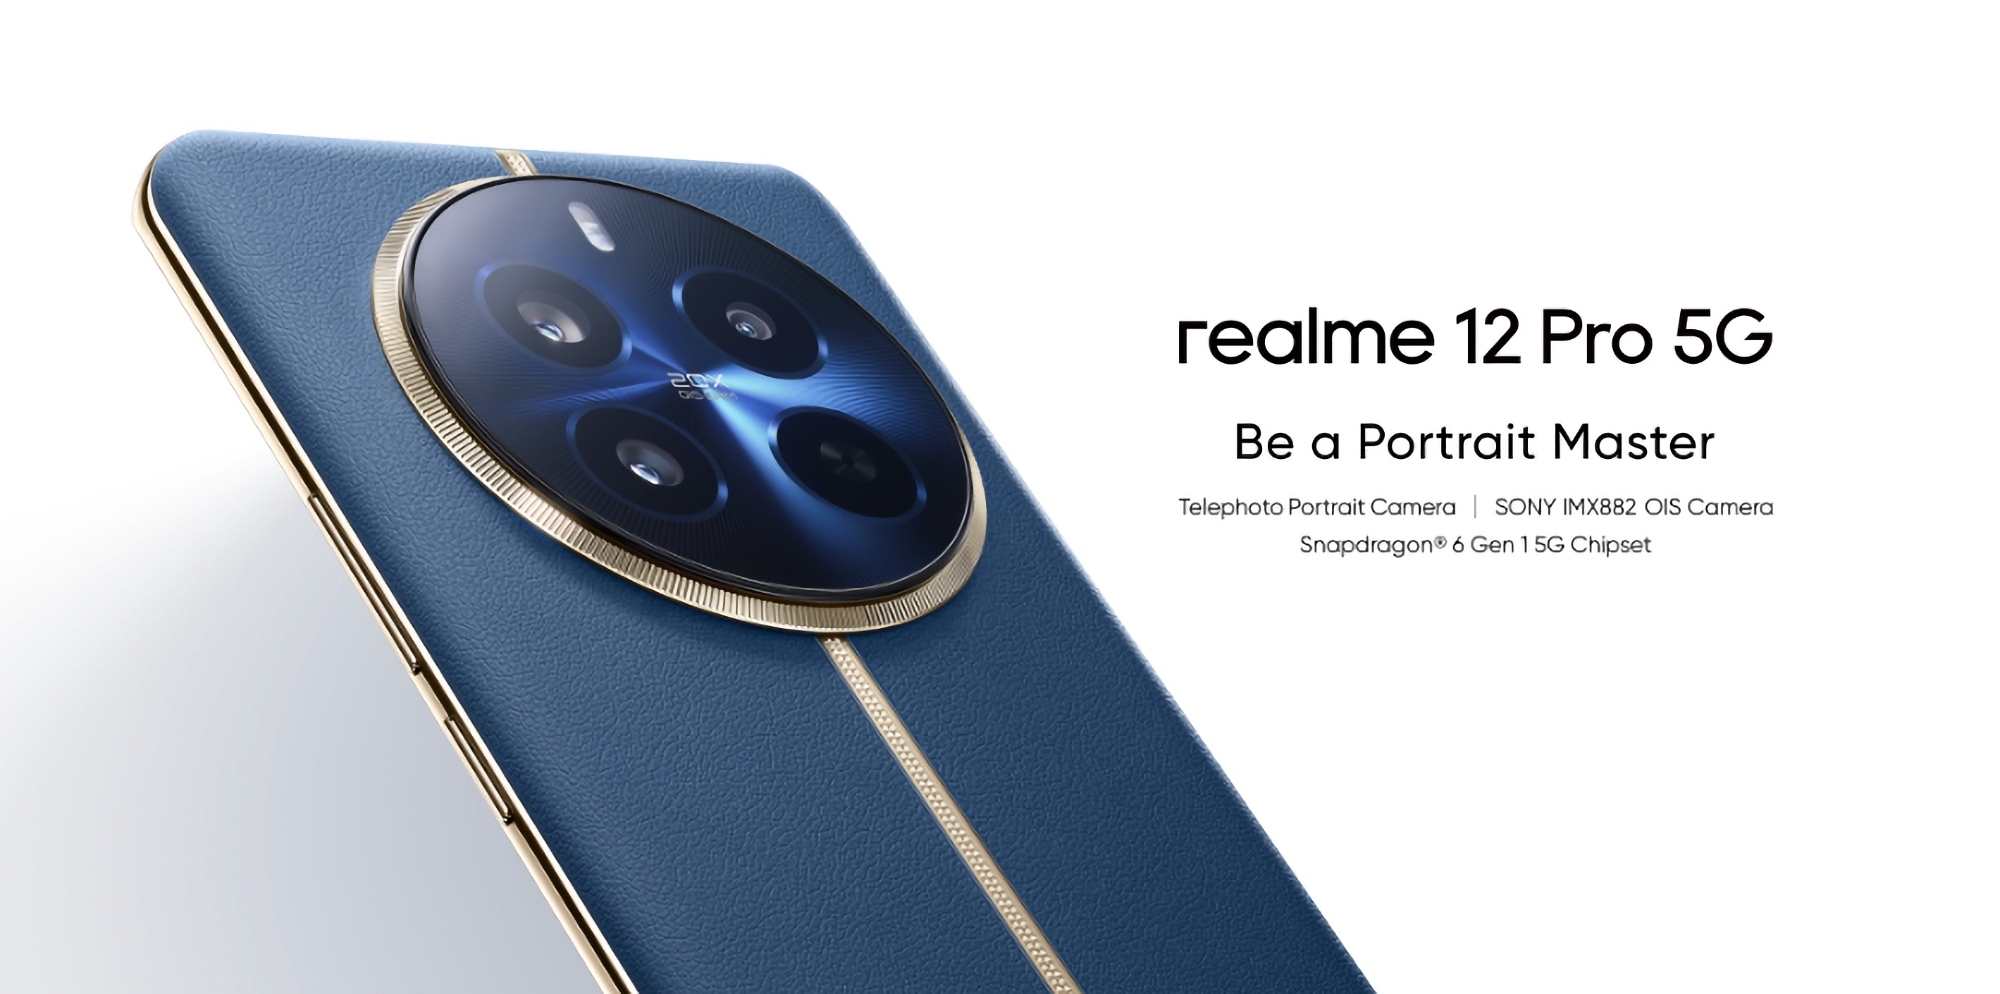 Realme 12 Pro: OLED display, Snapdragon 6 Gen 1 processor, 5000 mAh battery with 67W charging and 50 MP camera with OIS for $310